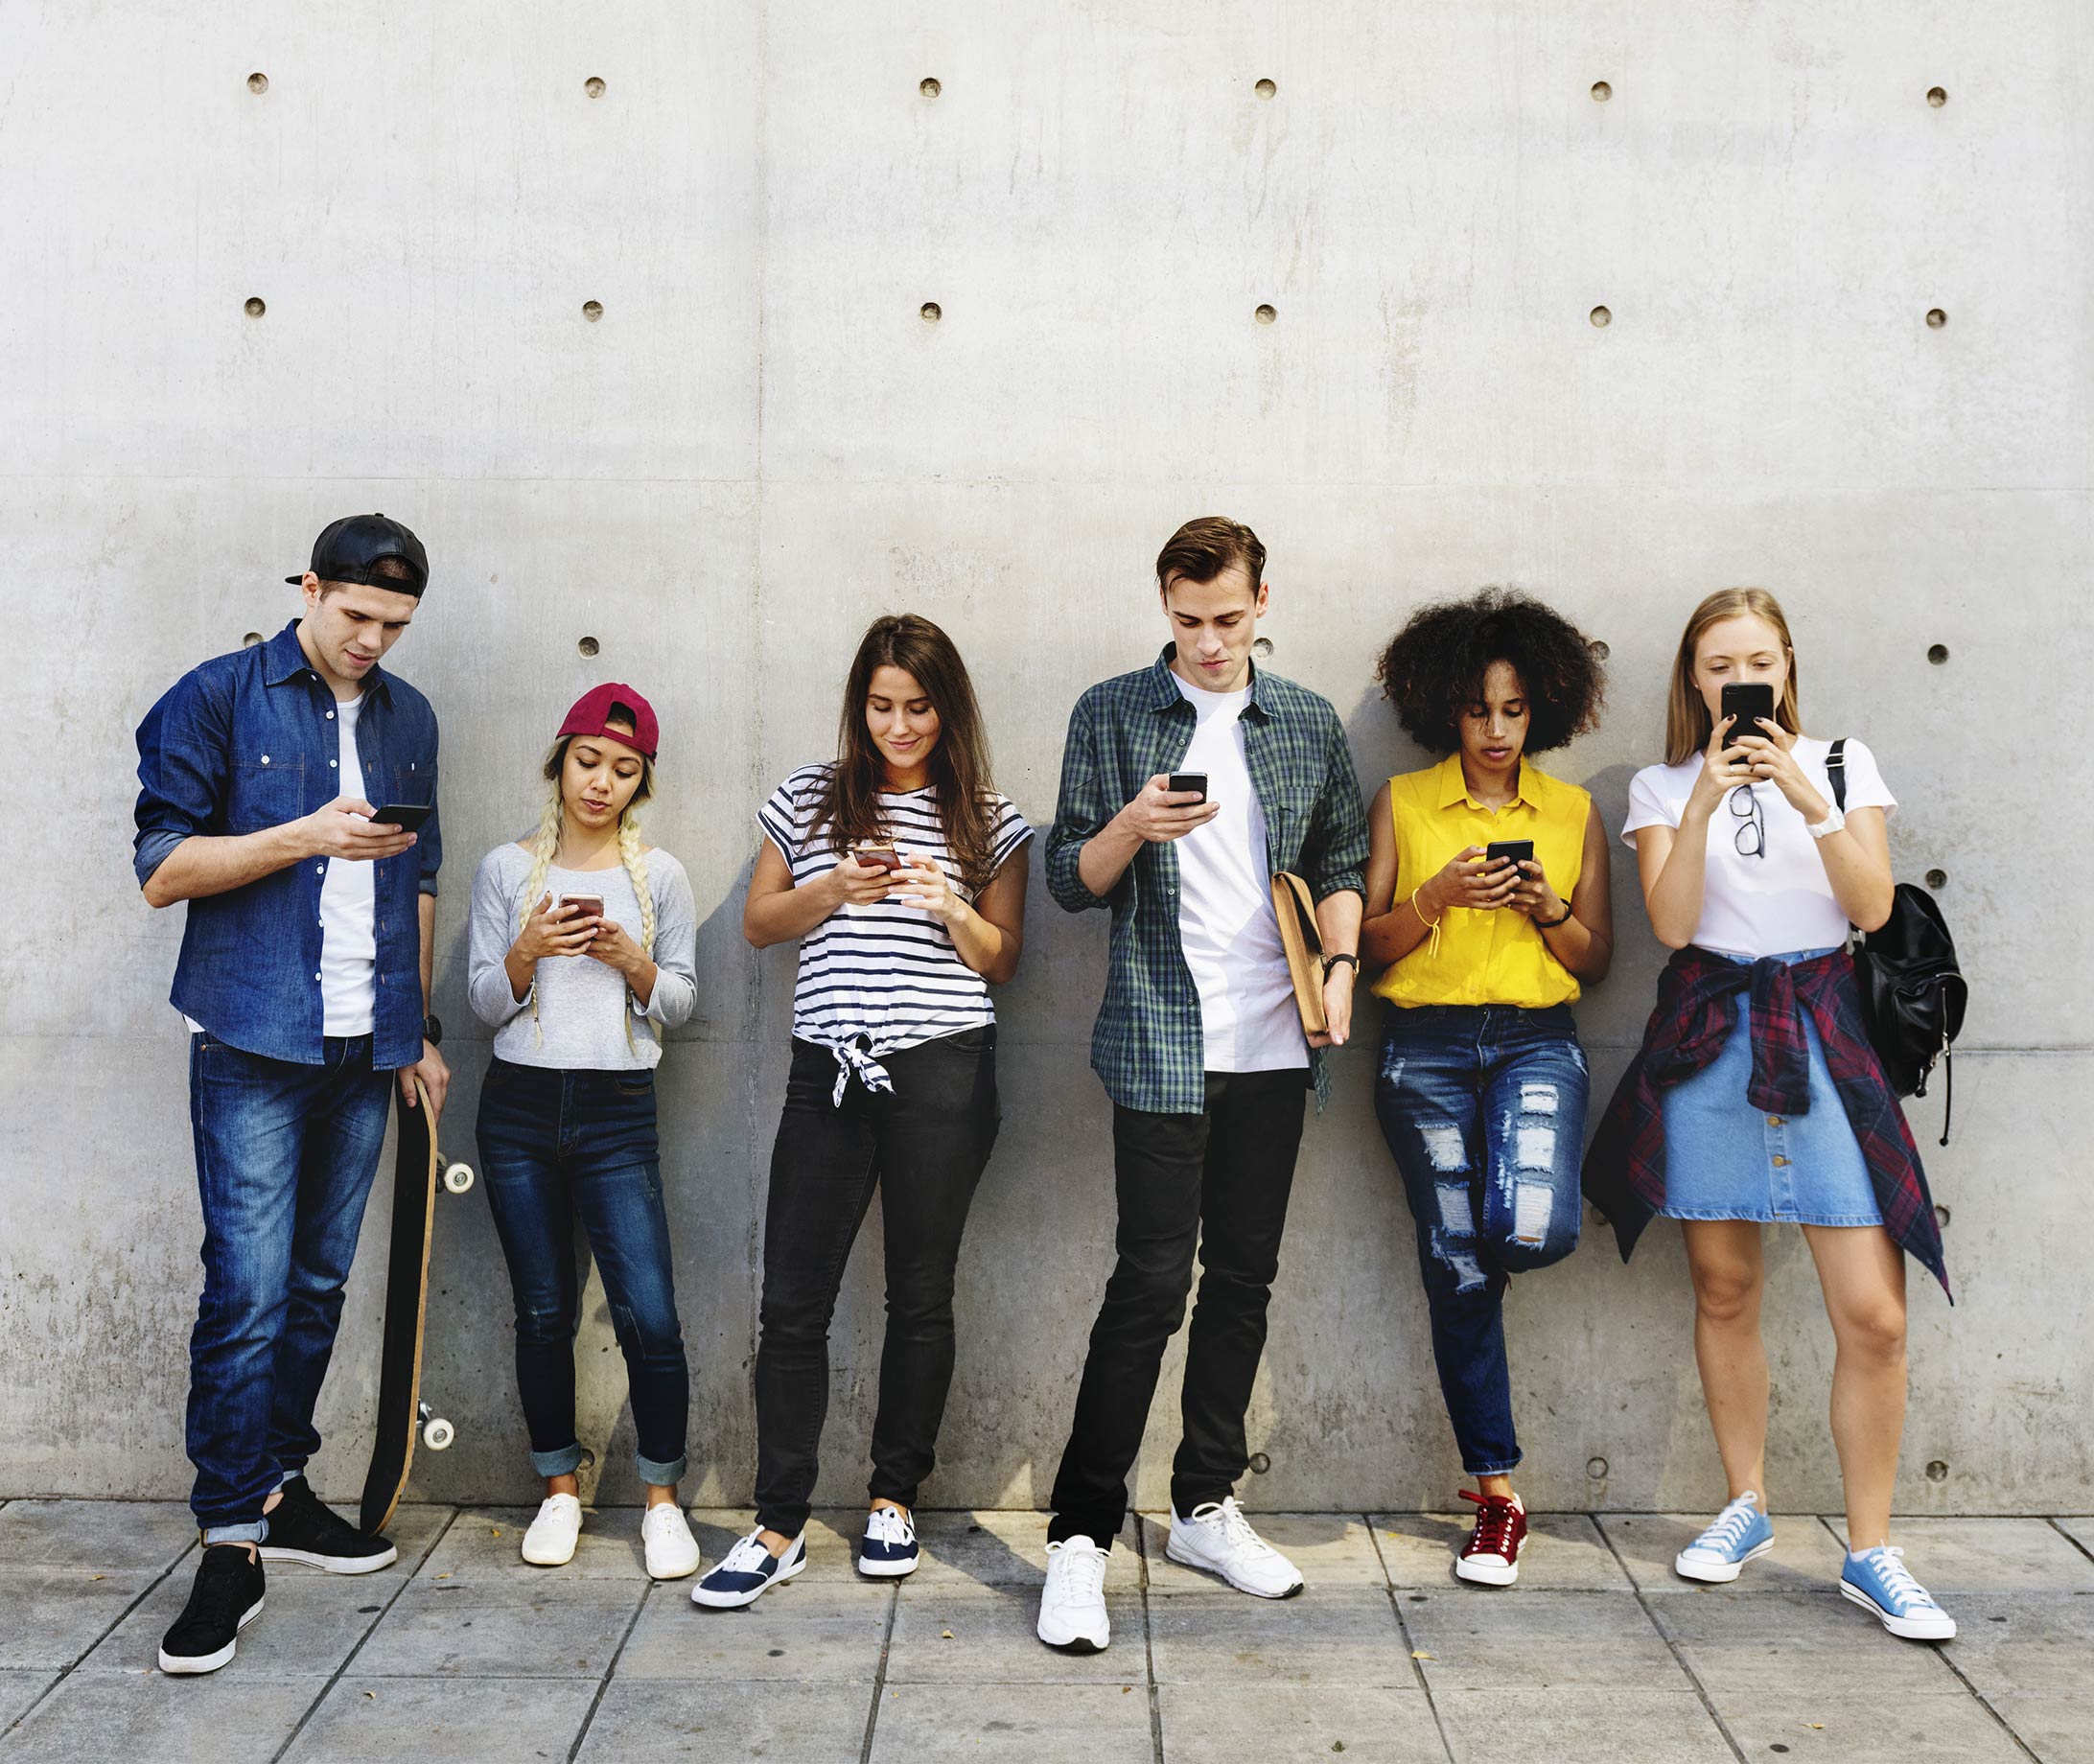 Future Now: The Audience of the Future is Generation Z